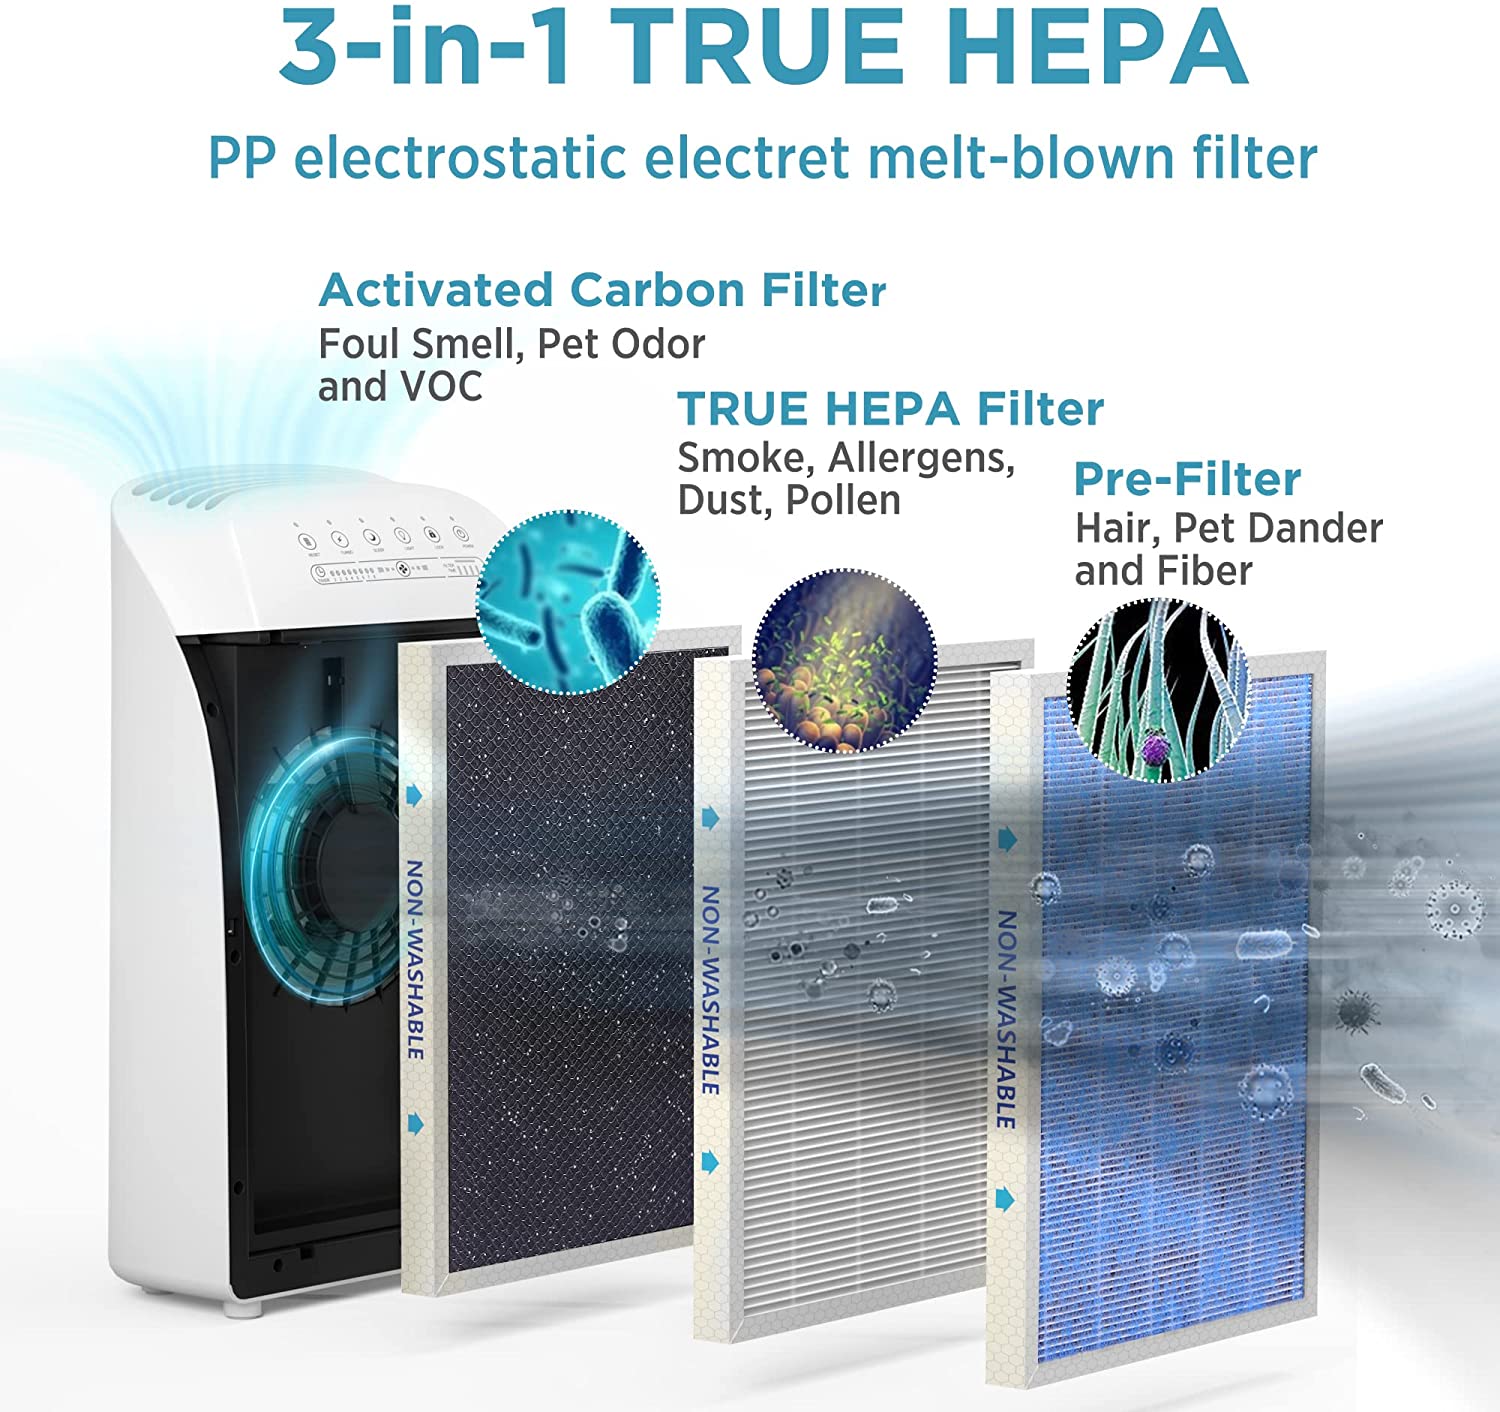 MSA3 Air Purifier for Allergy and Asthma True HEPA Filter for 1590 sq ft Large Room - image 3 of 10